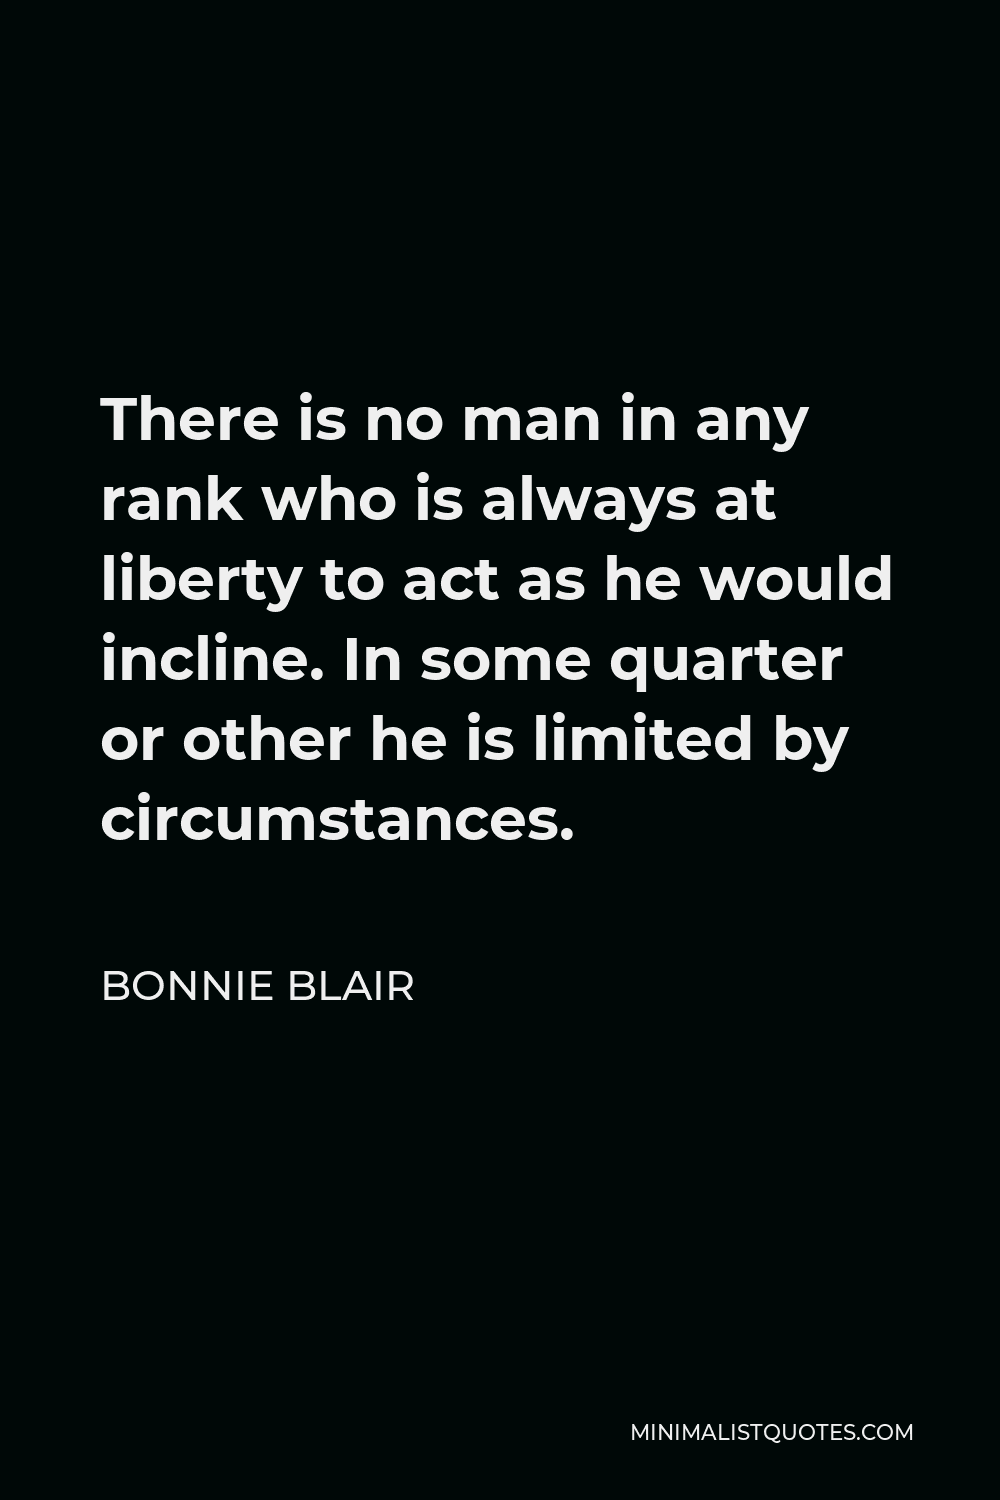 Bonnie Blair Quote - There is no man in any rank who is always at liberty to act as he would incline. In some quarter or other he is limited by circumstances.